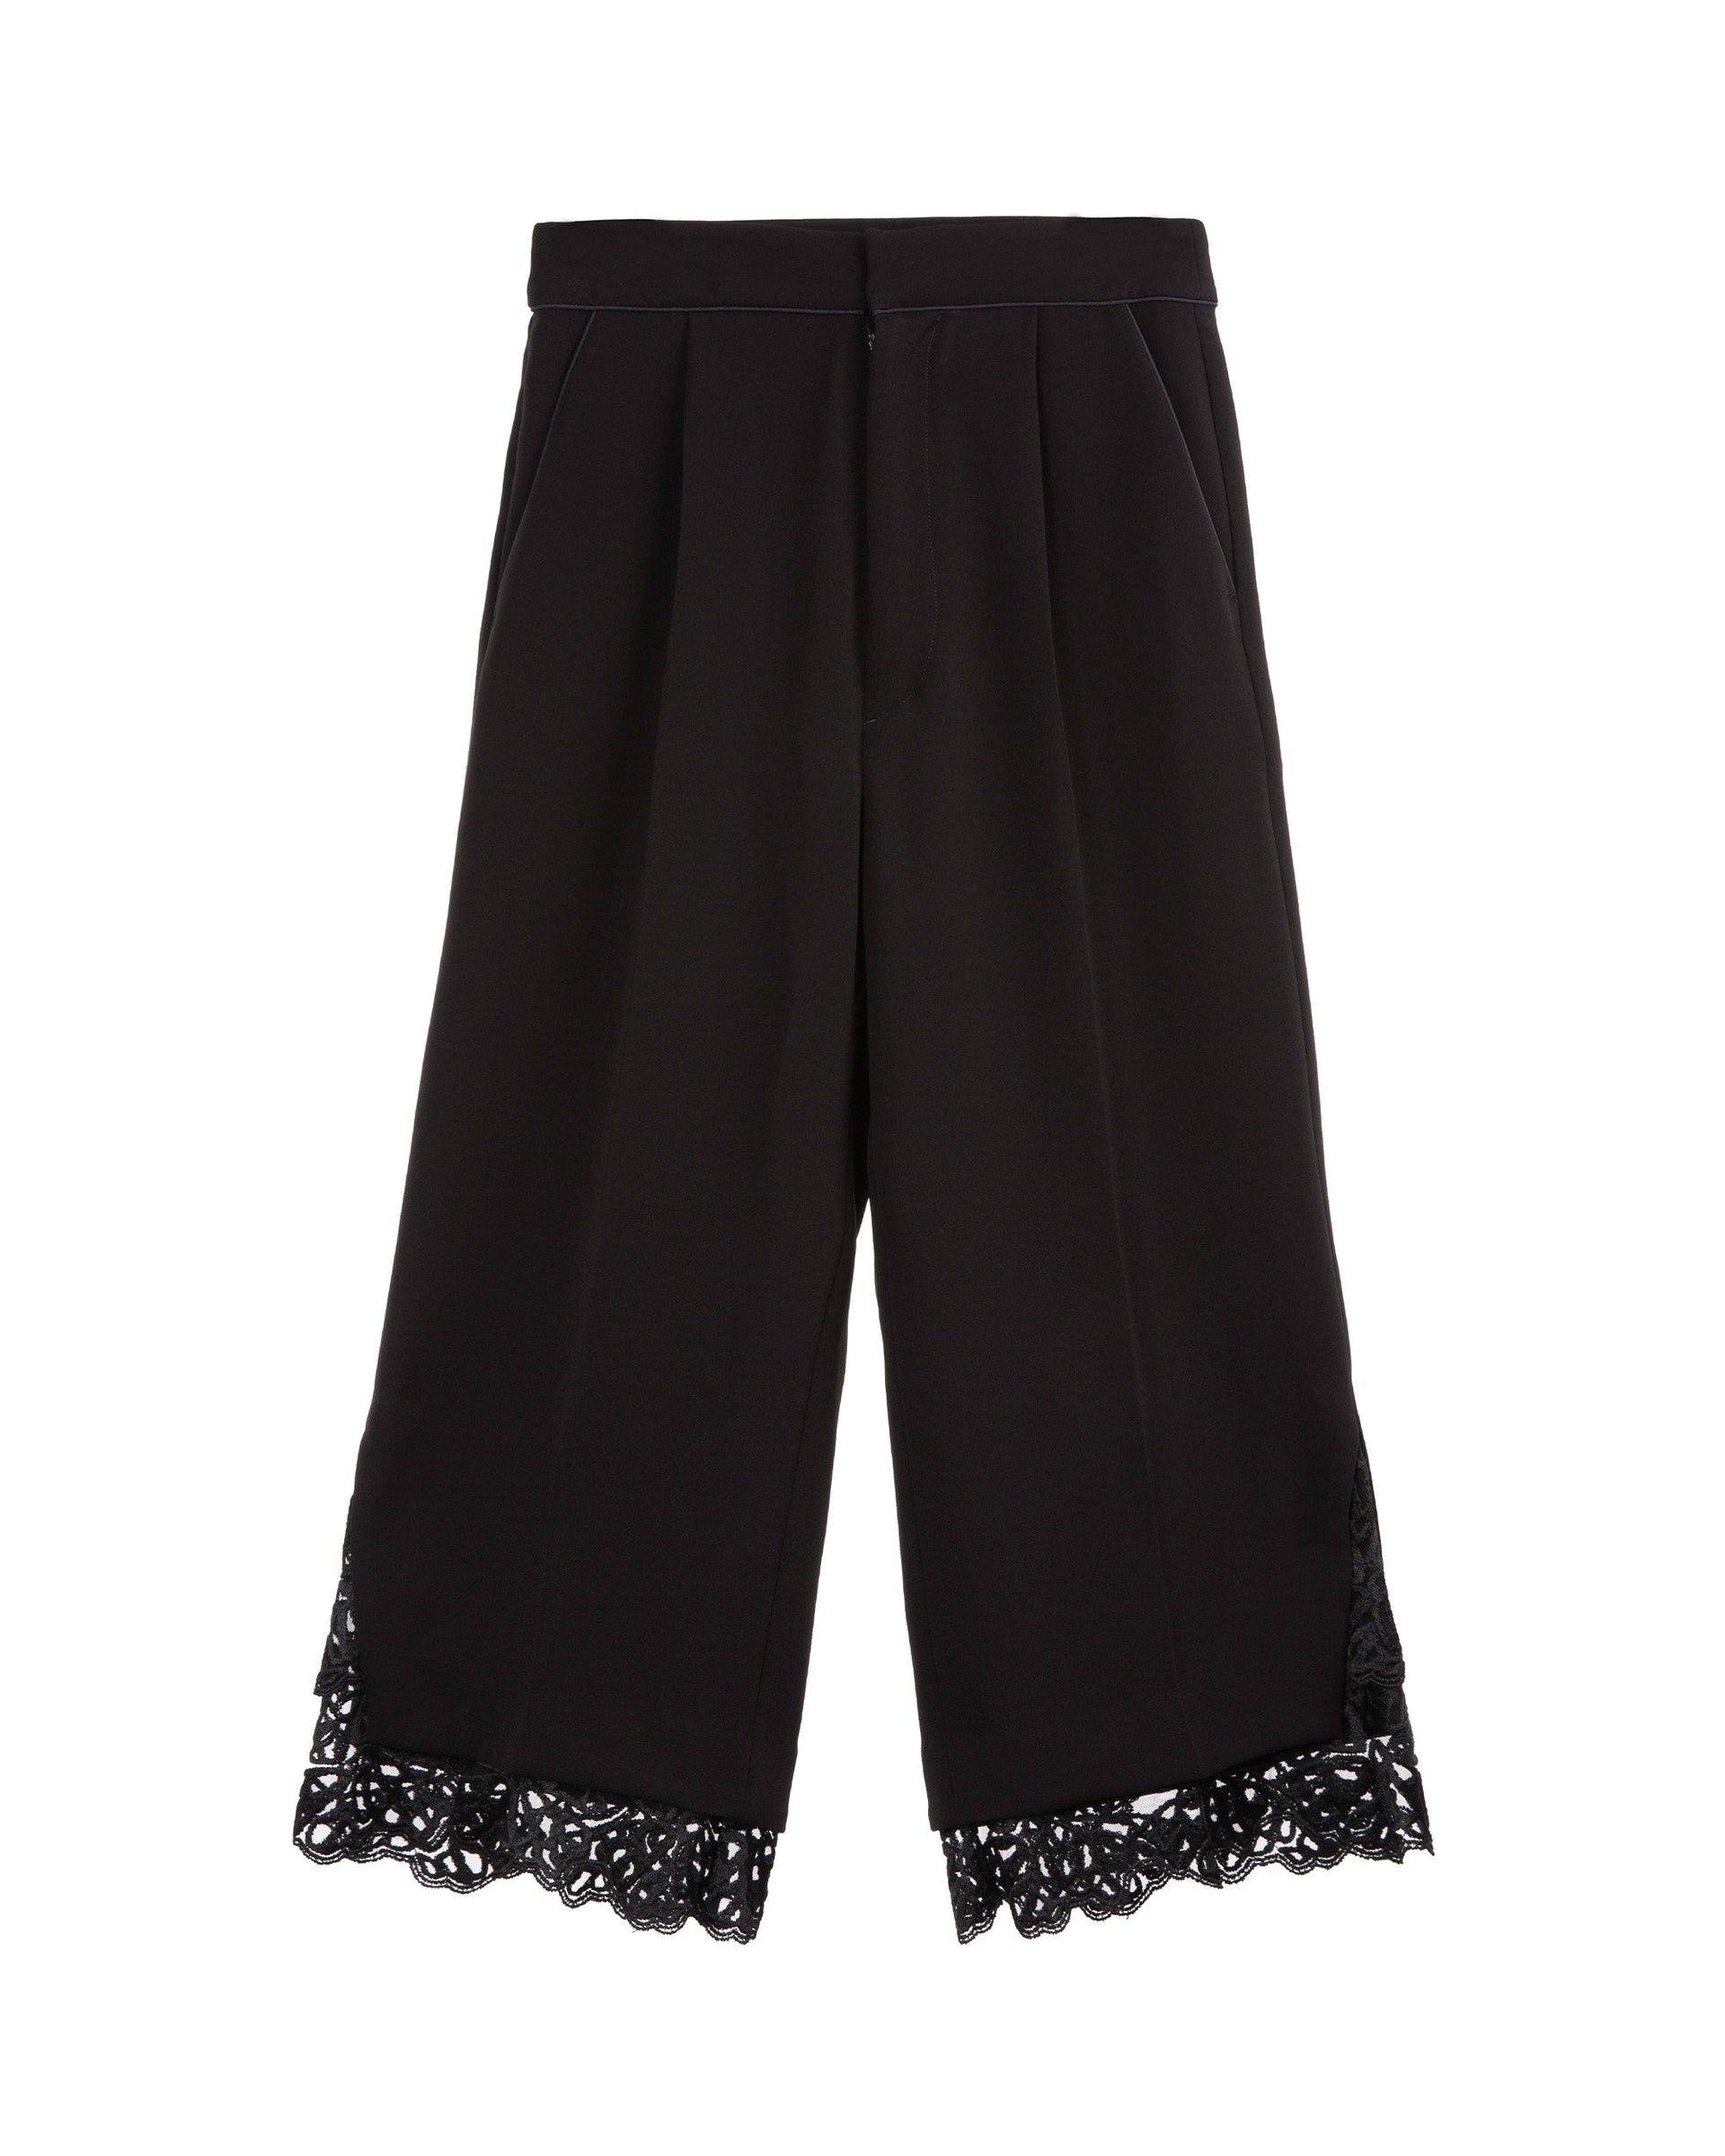 MIHOKO SAITO Floral Embroidery Wide Leg Pants by COCKTAIL